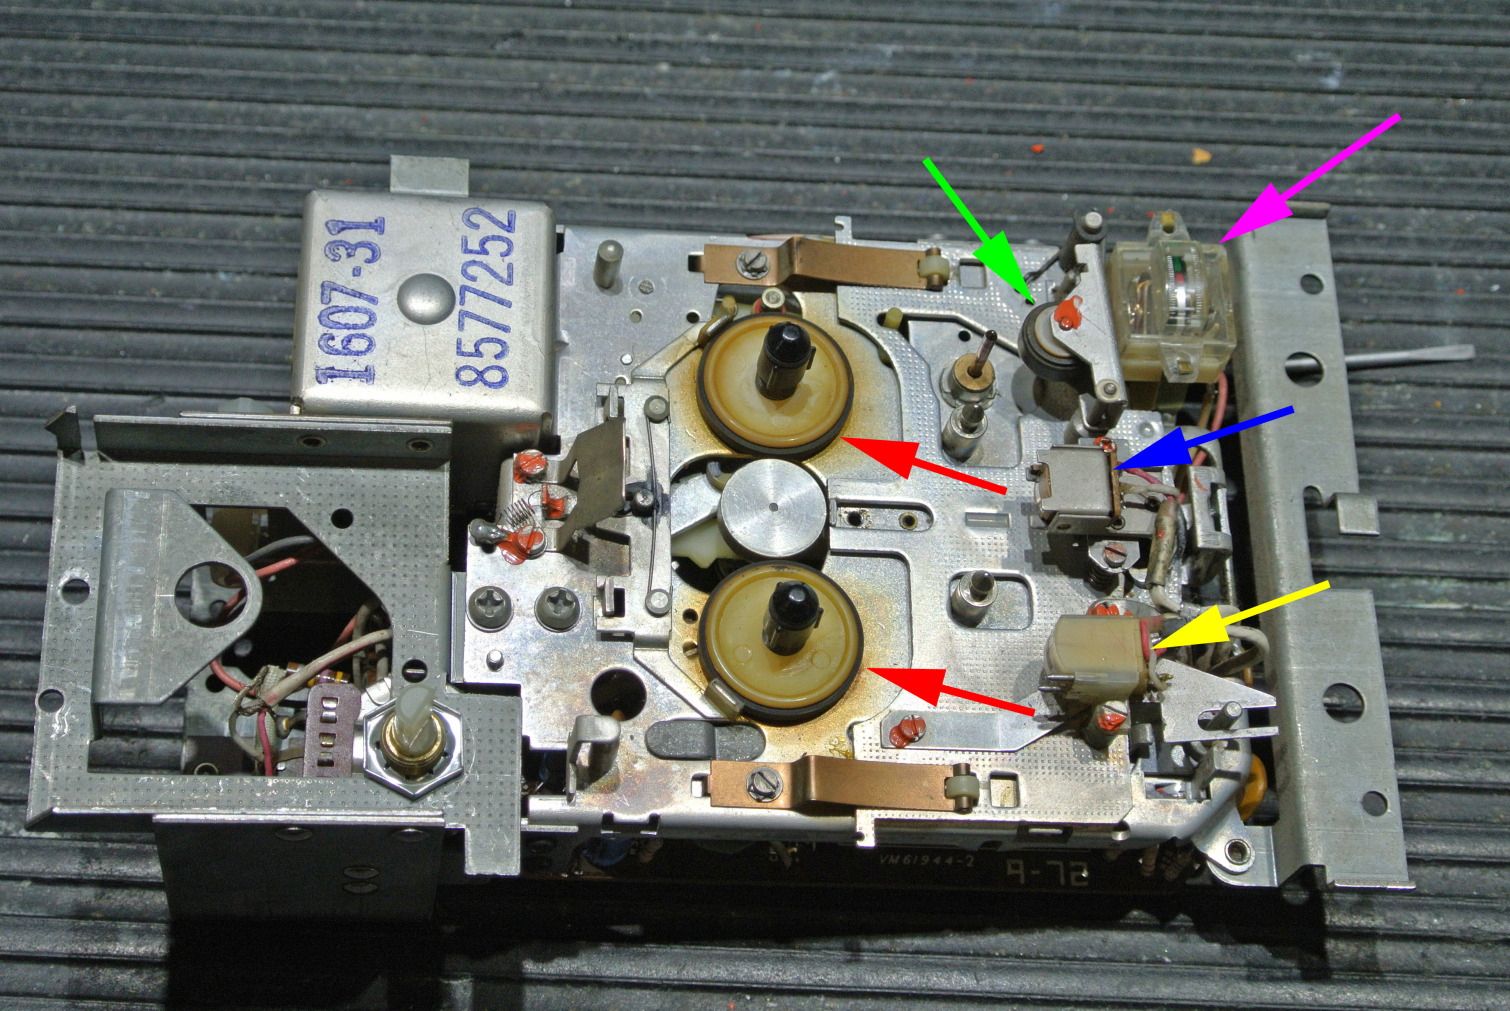 nutone model 2542 cassette player with arrows.jpg